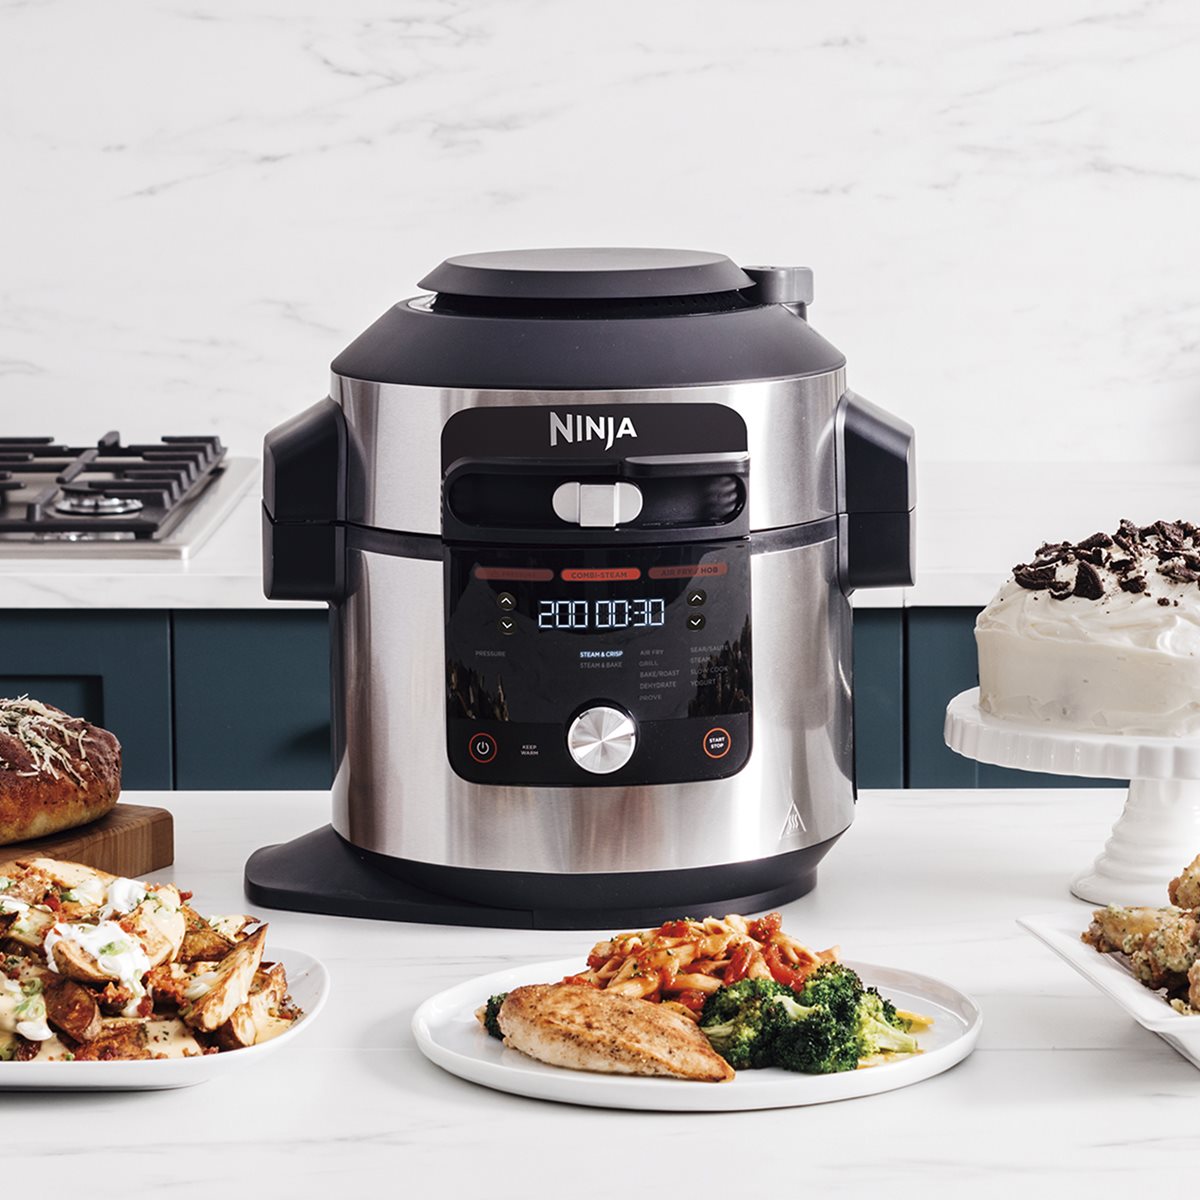 Ninja Foodi MAX Multi Cooker with SmartLid, 14 Cooking Functions in 1, 7.5L  14in1 Multi-Cooker, Pressure Cooker, Air Fryer, Combi-Steam, Slow Cook,  Bake, Grill, Copper/Black  Exclusive OL650UKCP